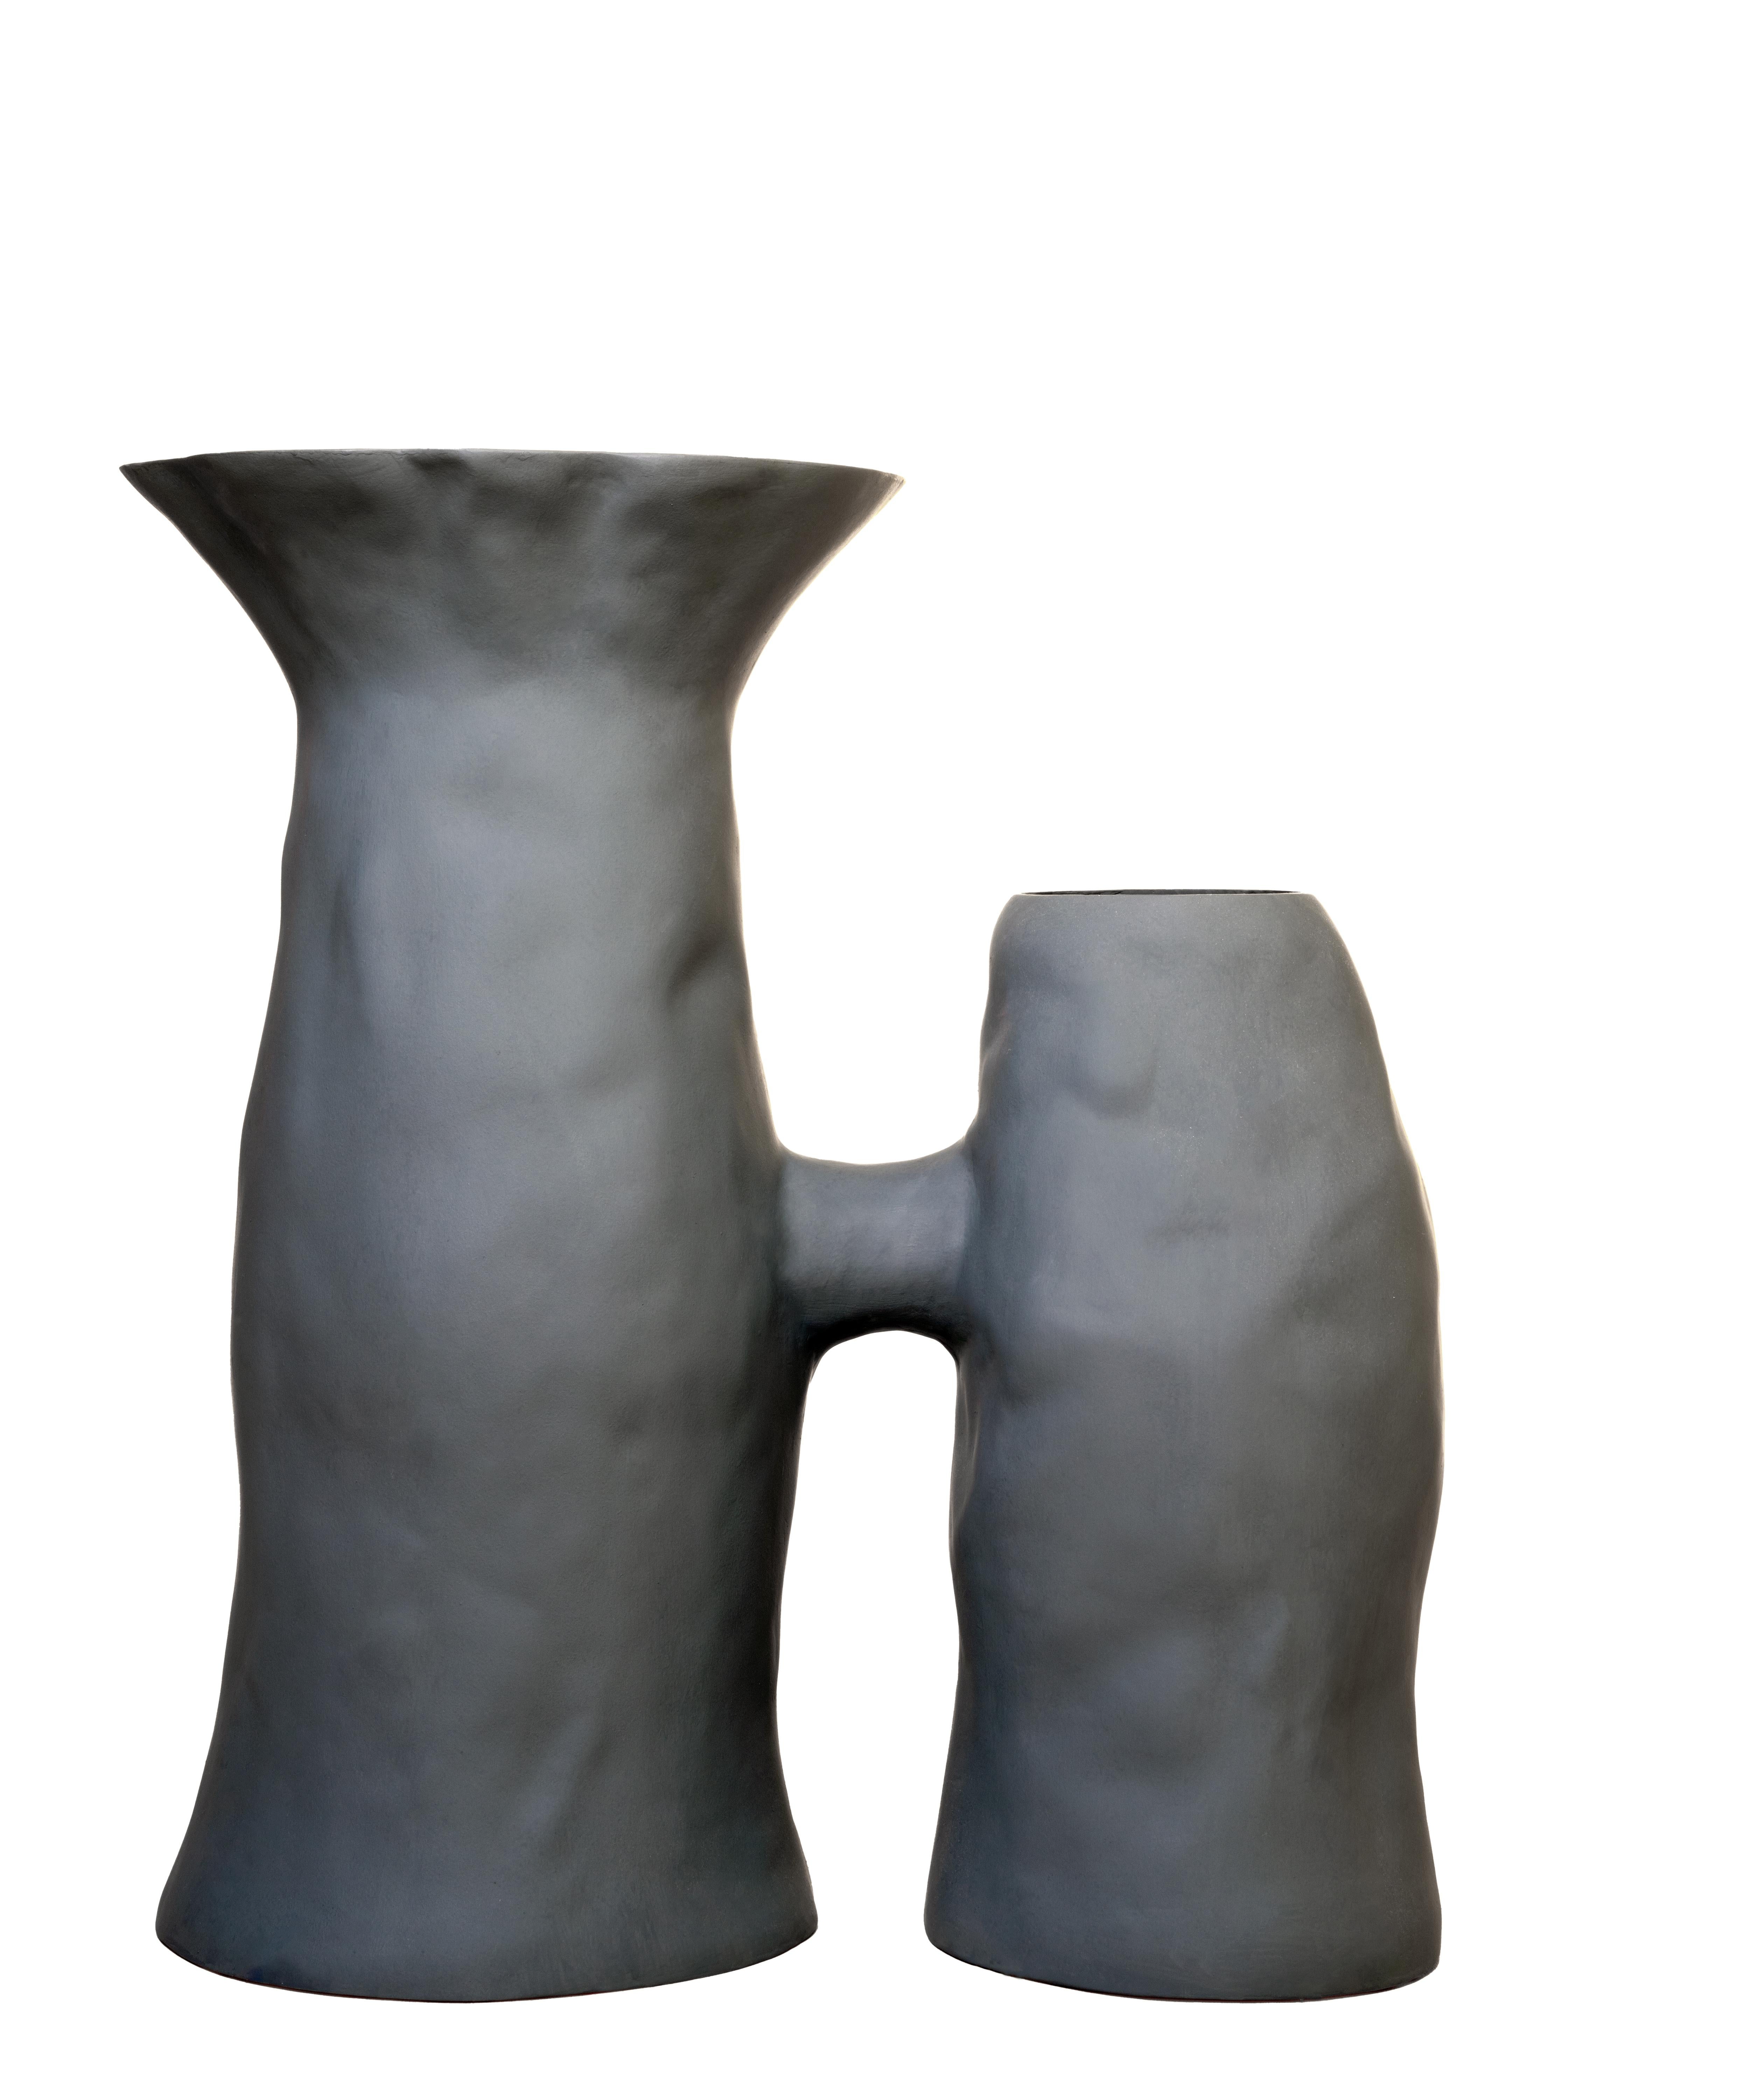 Drawing inspiration from nature and ceramics, this piece evokes the columned stalks of mushrooms or tree trunks to create a functional, emotional object. The piece is comprised of two columns cojoined in a poetic embrace, one standing tall while the